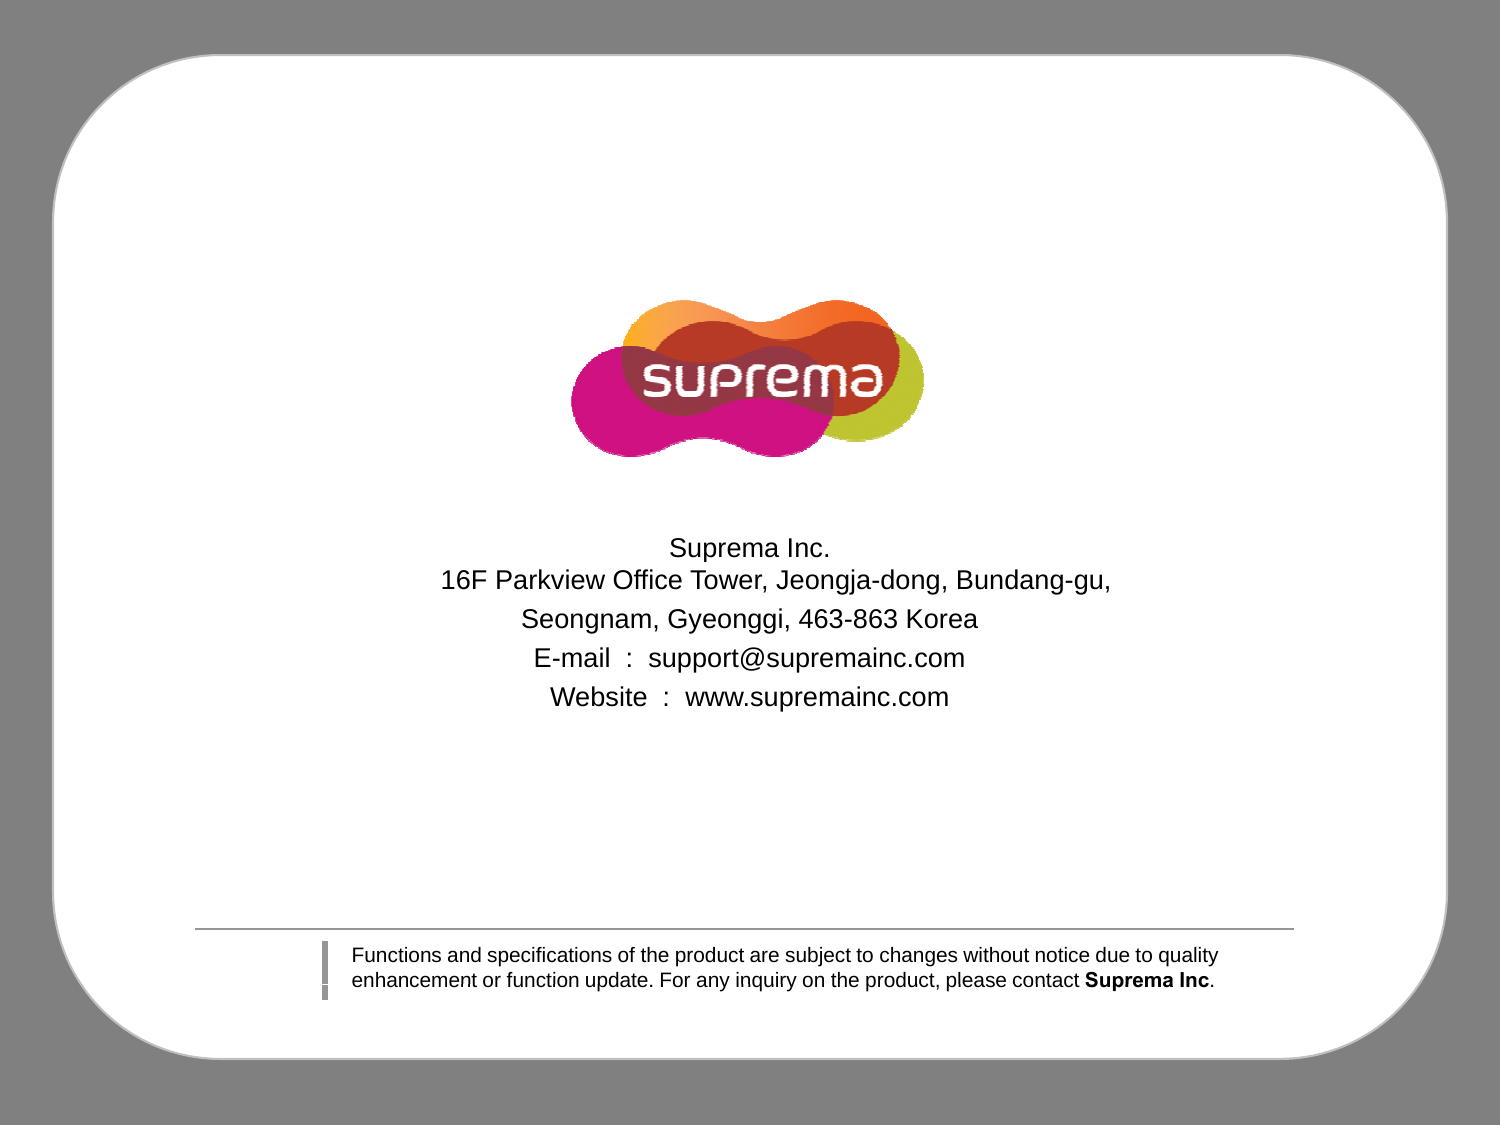 Suprema Inc.16F Parkview Office Tower, Jeongja-dong, Bundang-gu, Seongnam, Gyeonggi, 463-863 KoreaE-mail  :  support@supremainc.comWebsite : www supremainc comWebsite  :  www.supremainc.comFunctions and specifications of the product are subject to changes without notice due to quality enhancement or function update For any inquiry on the product please contactSuprema Incenhancement or function update. For any inquiry on the product, please contact Suprema Inc.